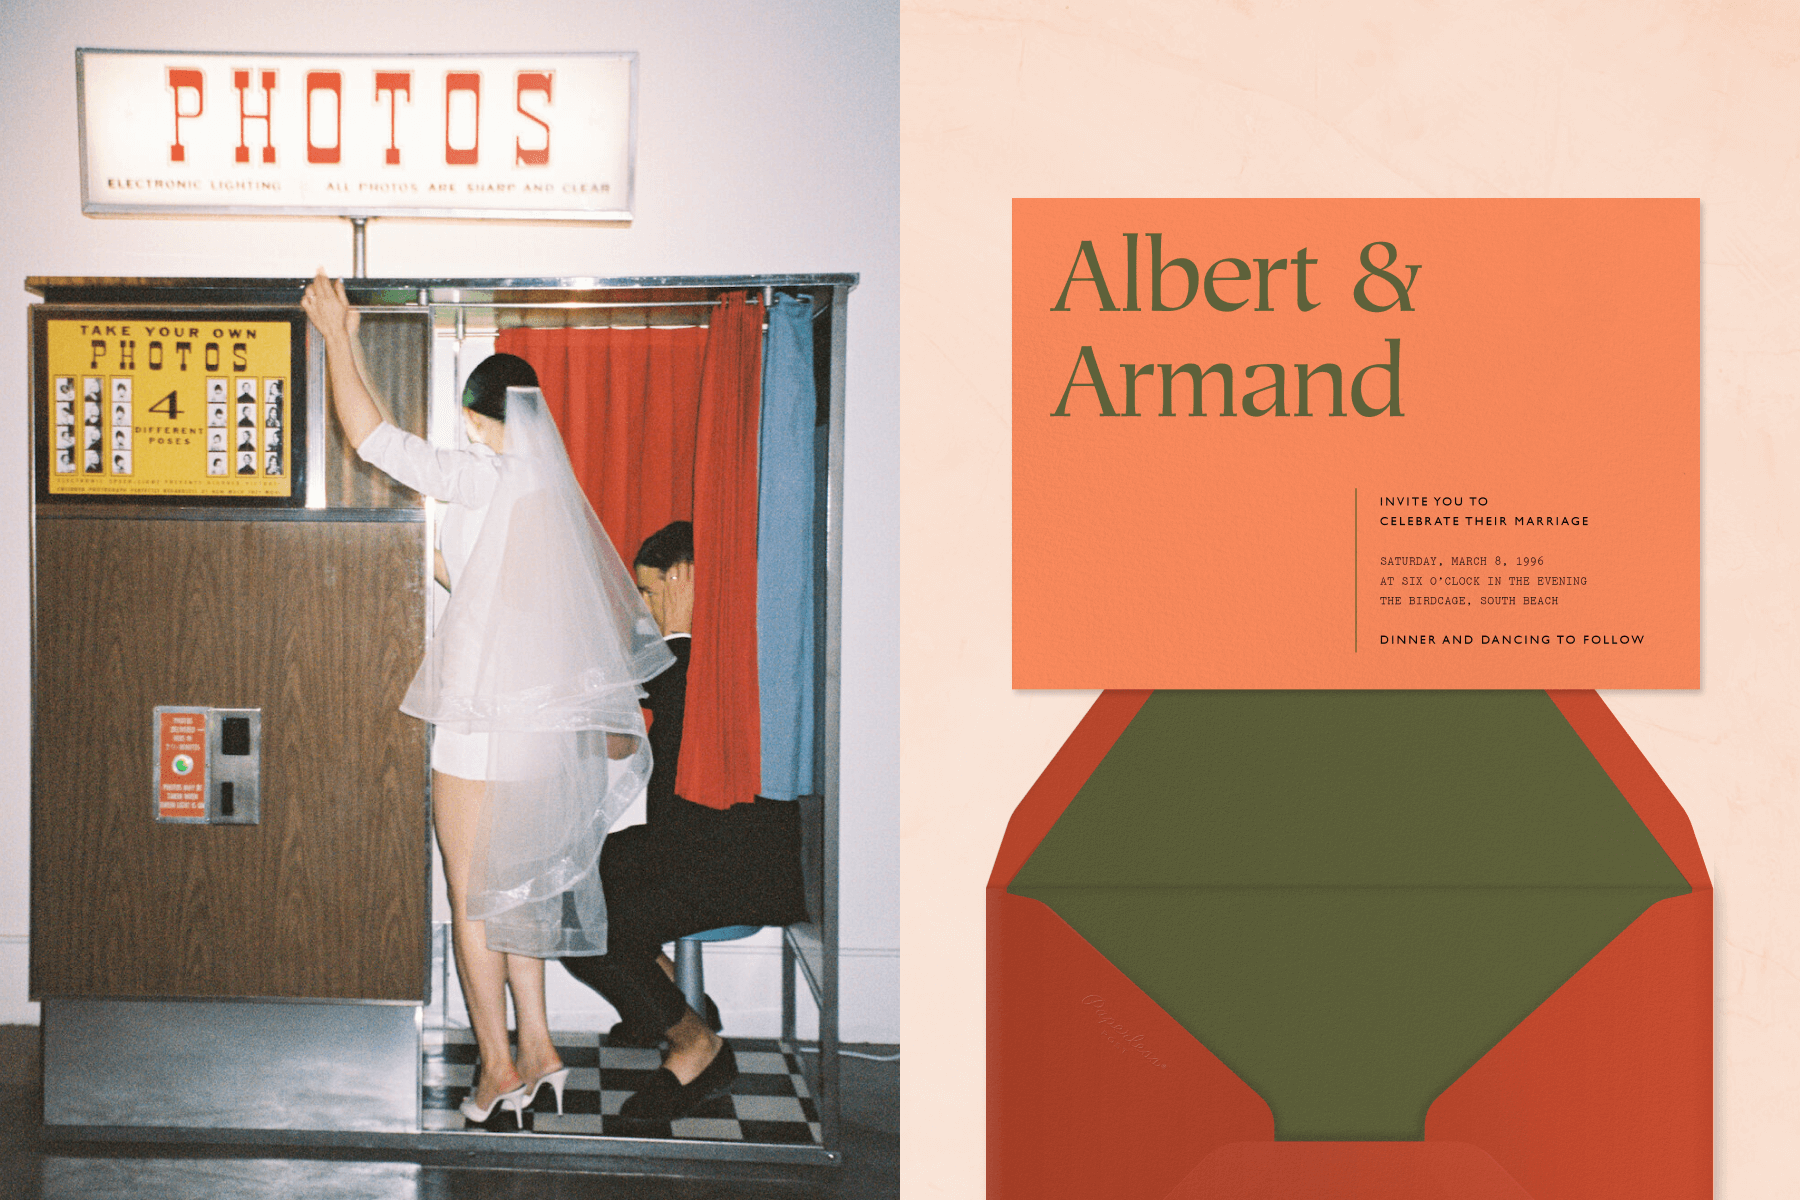 Left: A couple in semi-casual wedding attire pose at a retro photo booth with wood paneling. Right: A salmon-colored wedding invitation with the couple’s first names written in large green serif font in the top left corner and a red envelope with green lining.